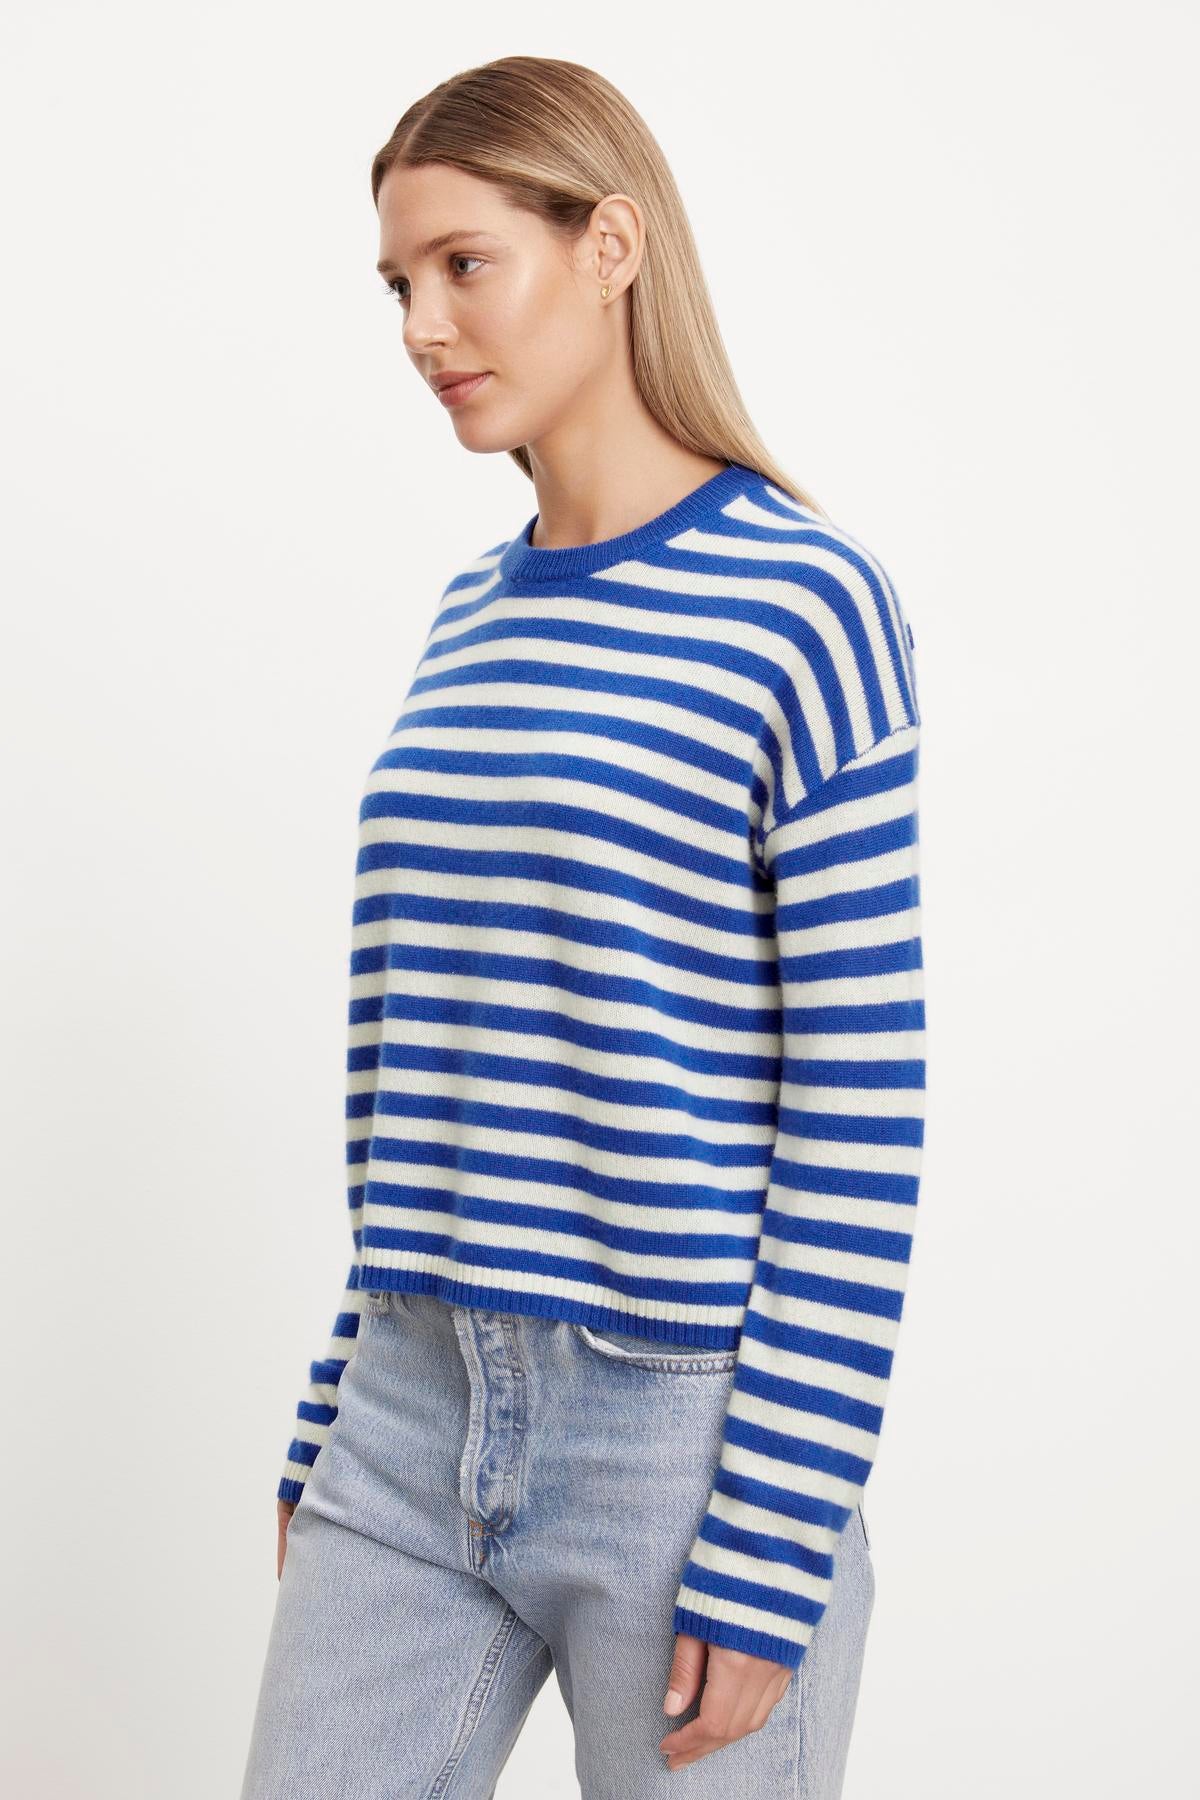 The model is wearing a Velvet by Graham & Spencer ALYSSA CASHMERE STRIPED CREW NECK SWEATER.-35702033154241